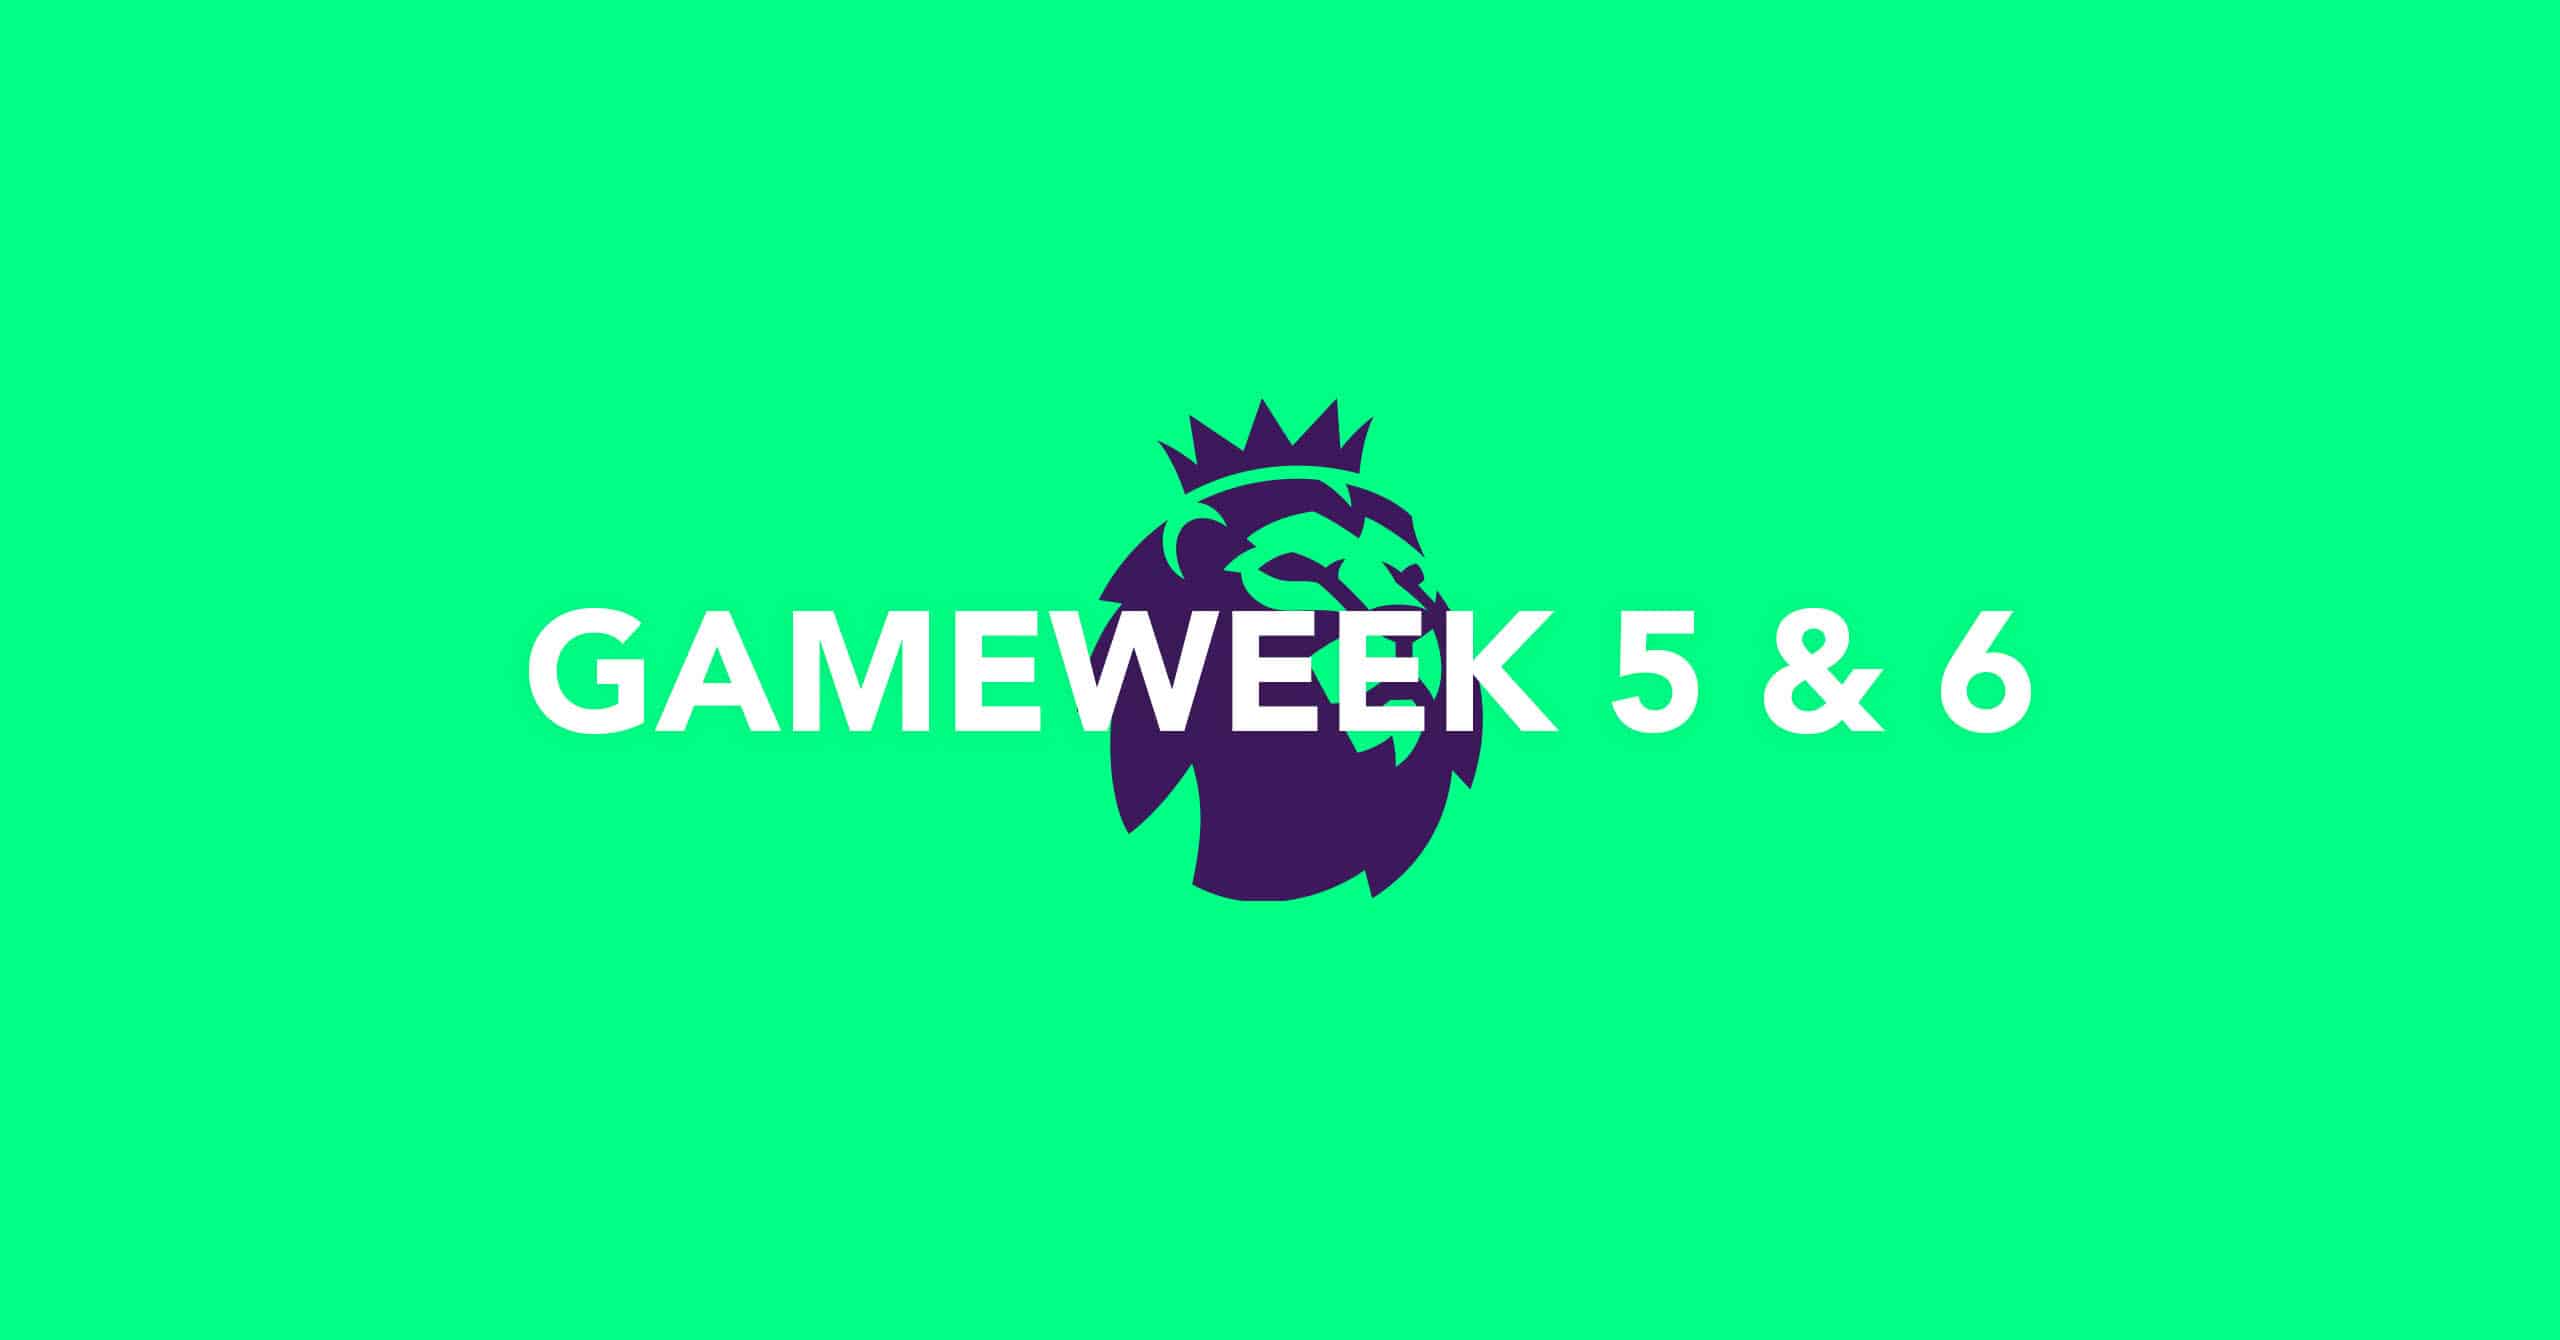 Preview of and tips for Gameweek 5 & 6 of the 2022/23 Fantasy Premier League season